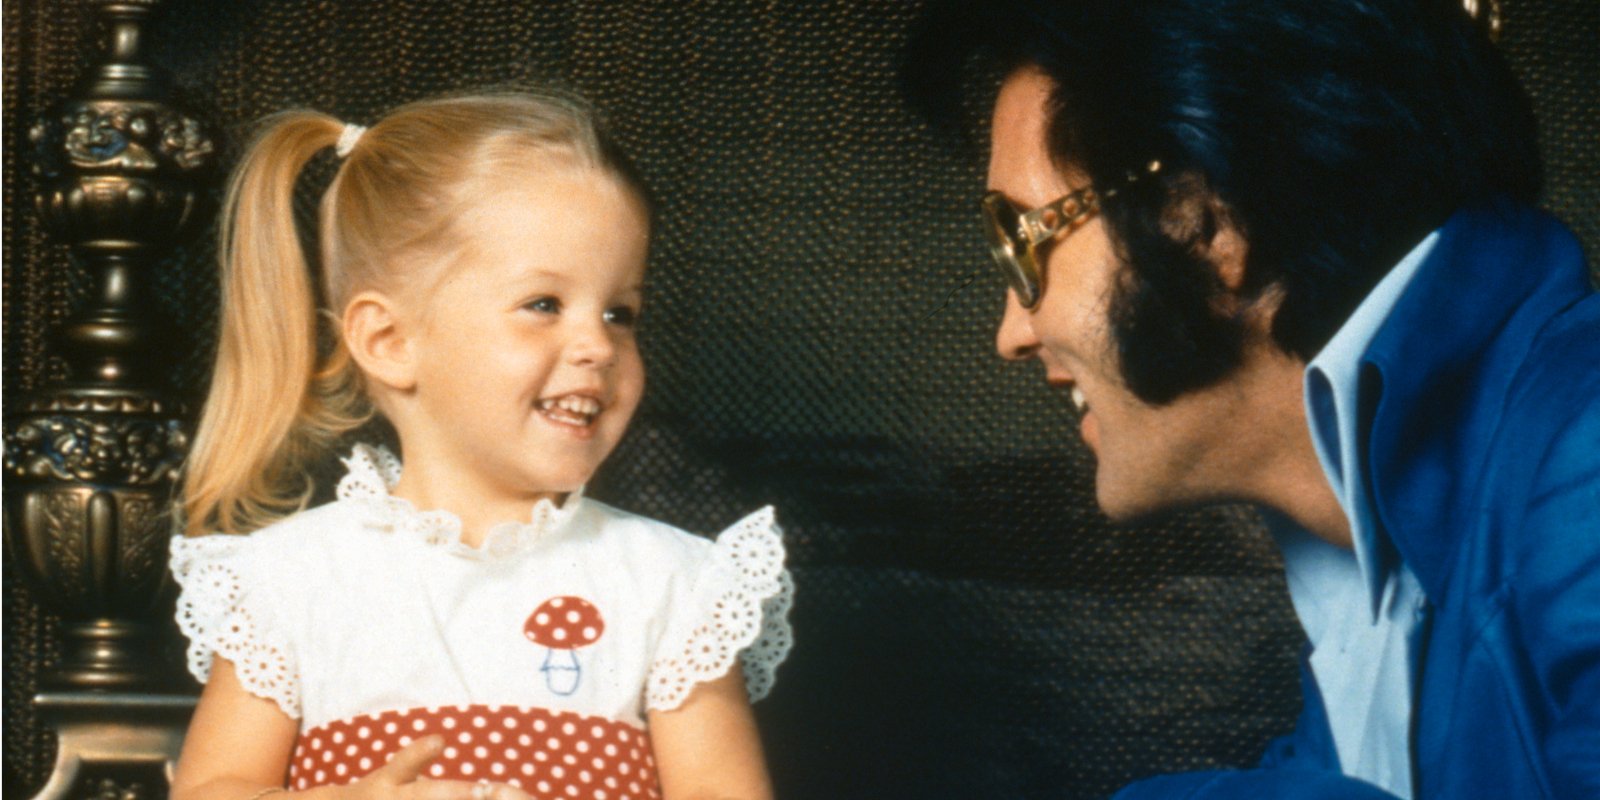 Lisa Marie Presley and Elvis Presley photographed at Graceland in the early 1970s.